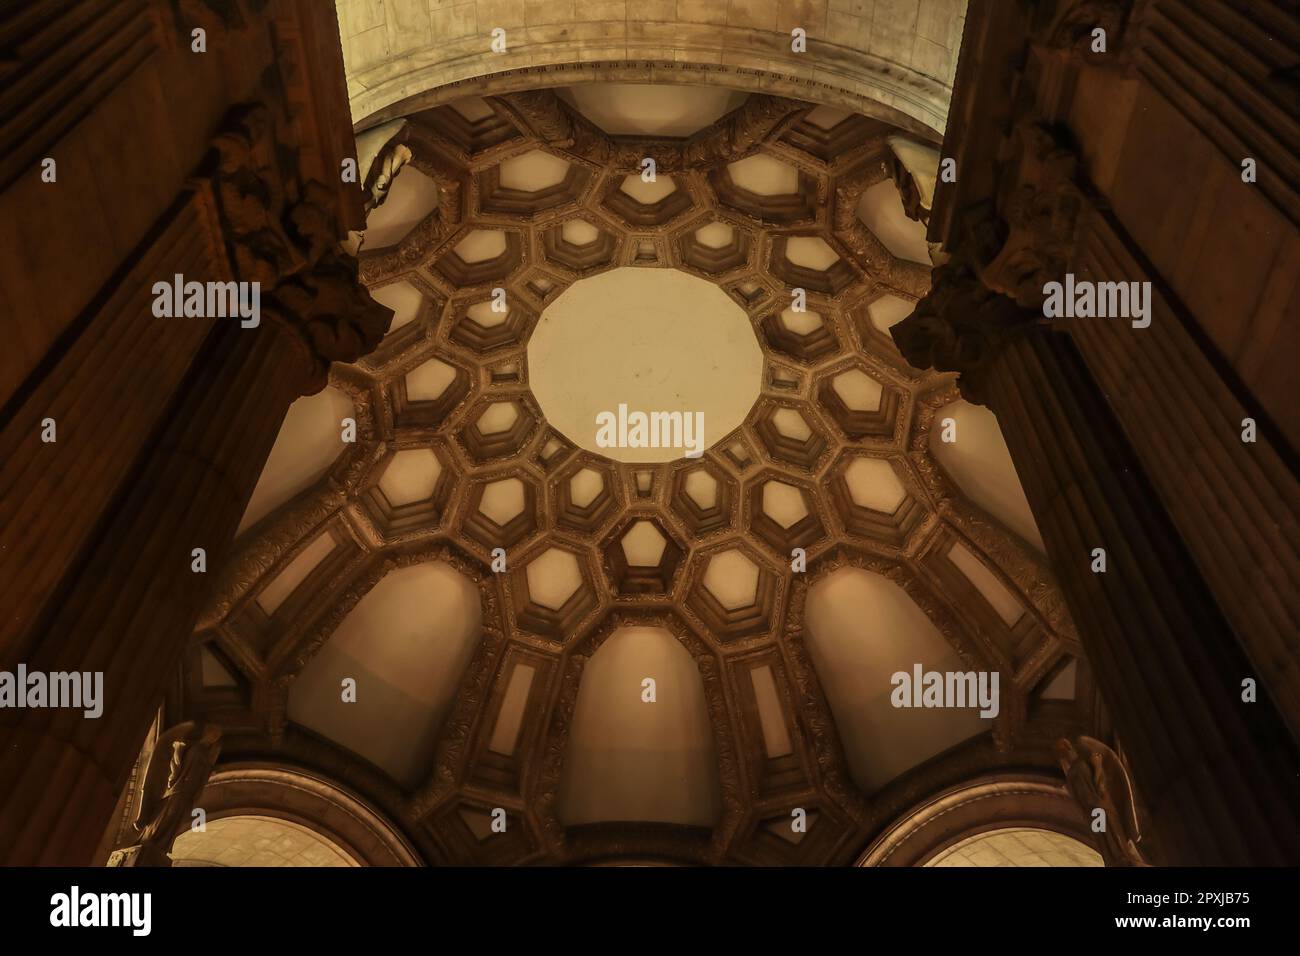 The interior details of the dome of the Palace of Fine Arts in San Francisco, California at night. Stock Photo